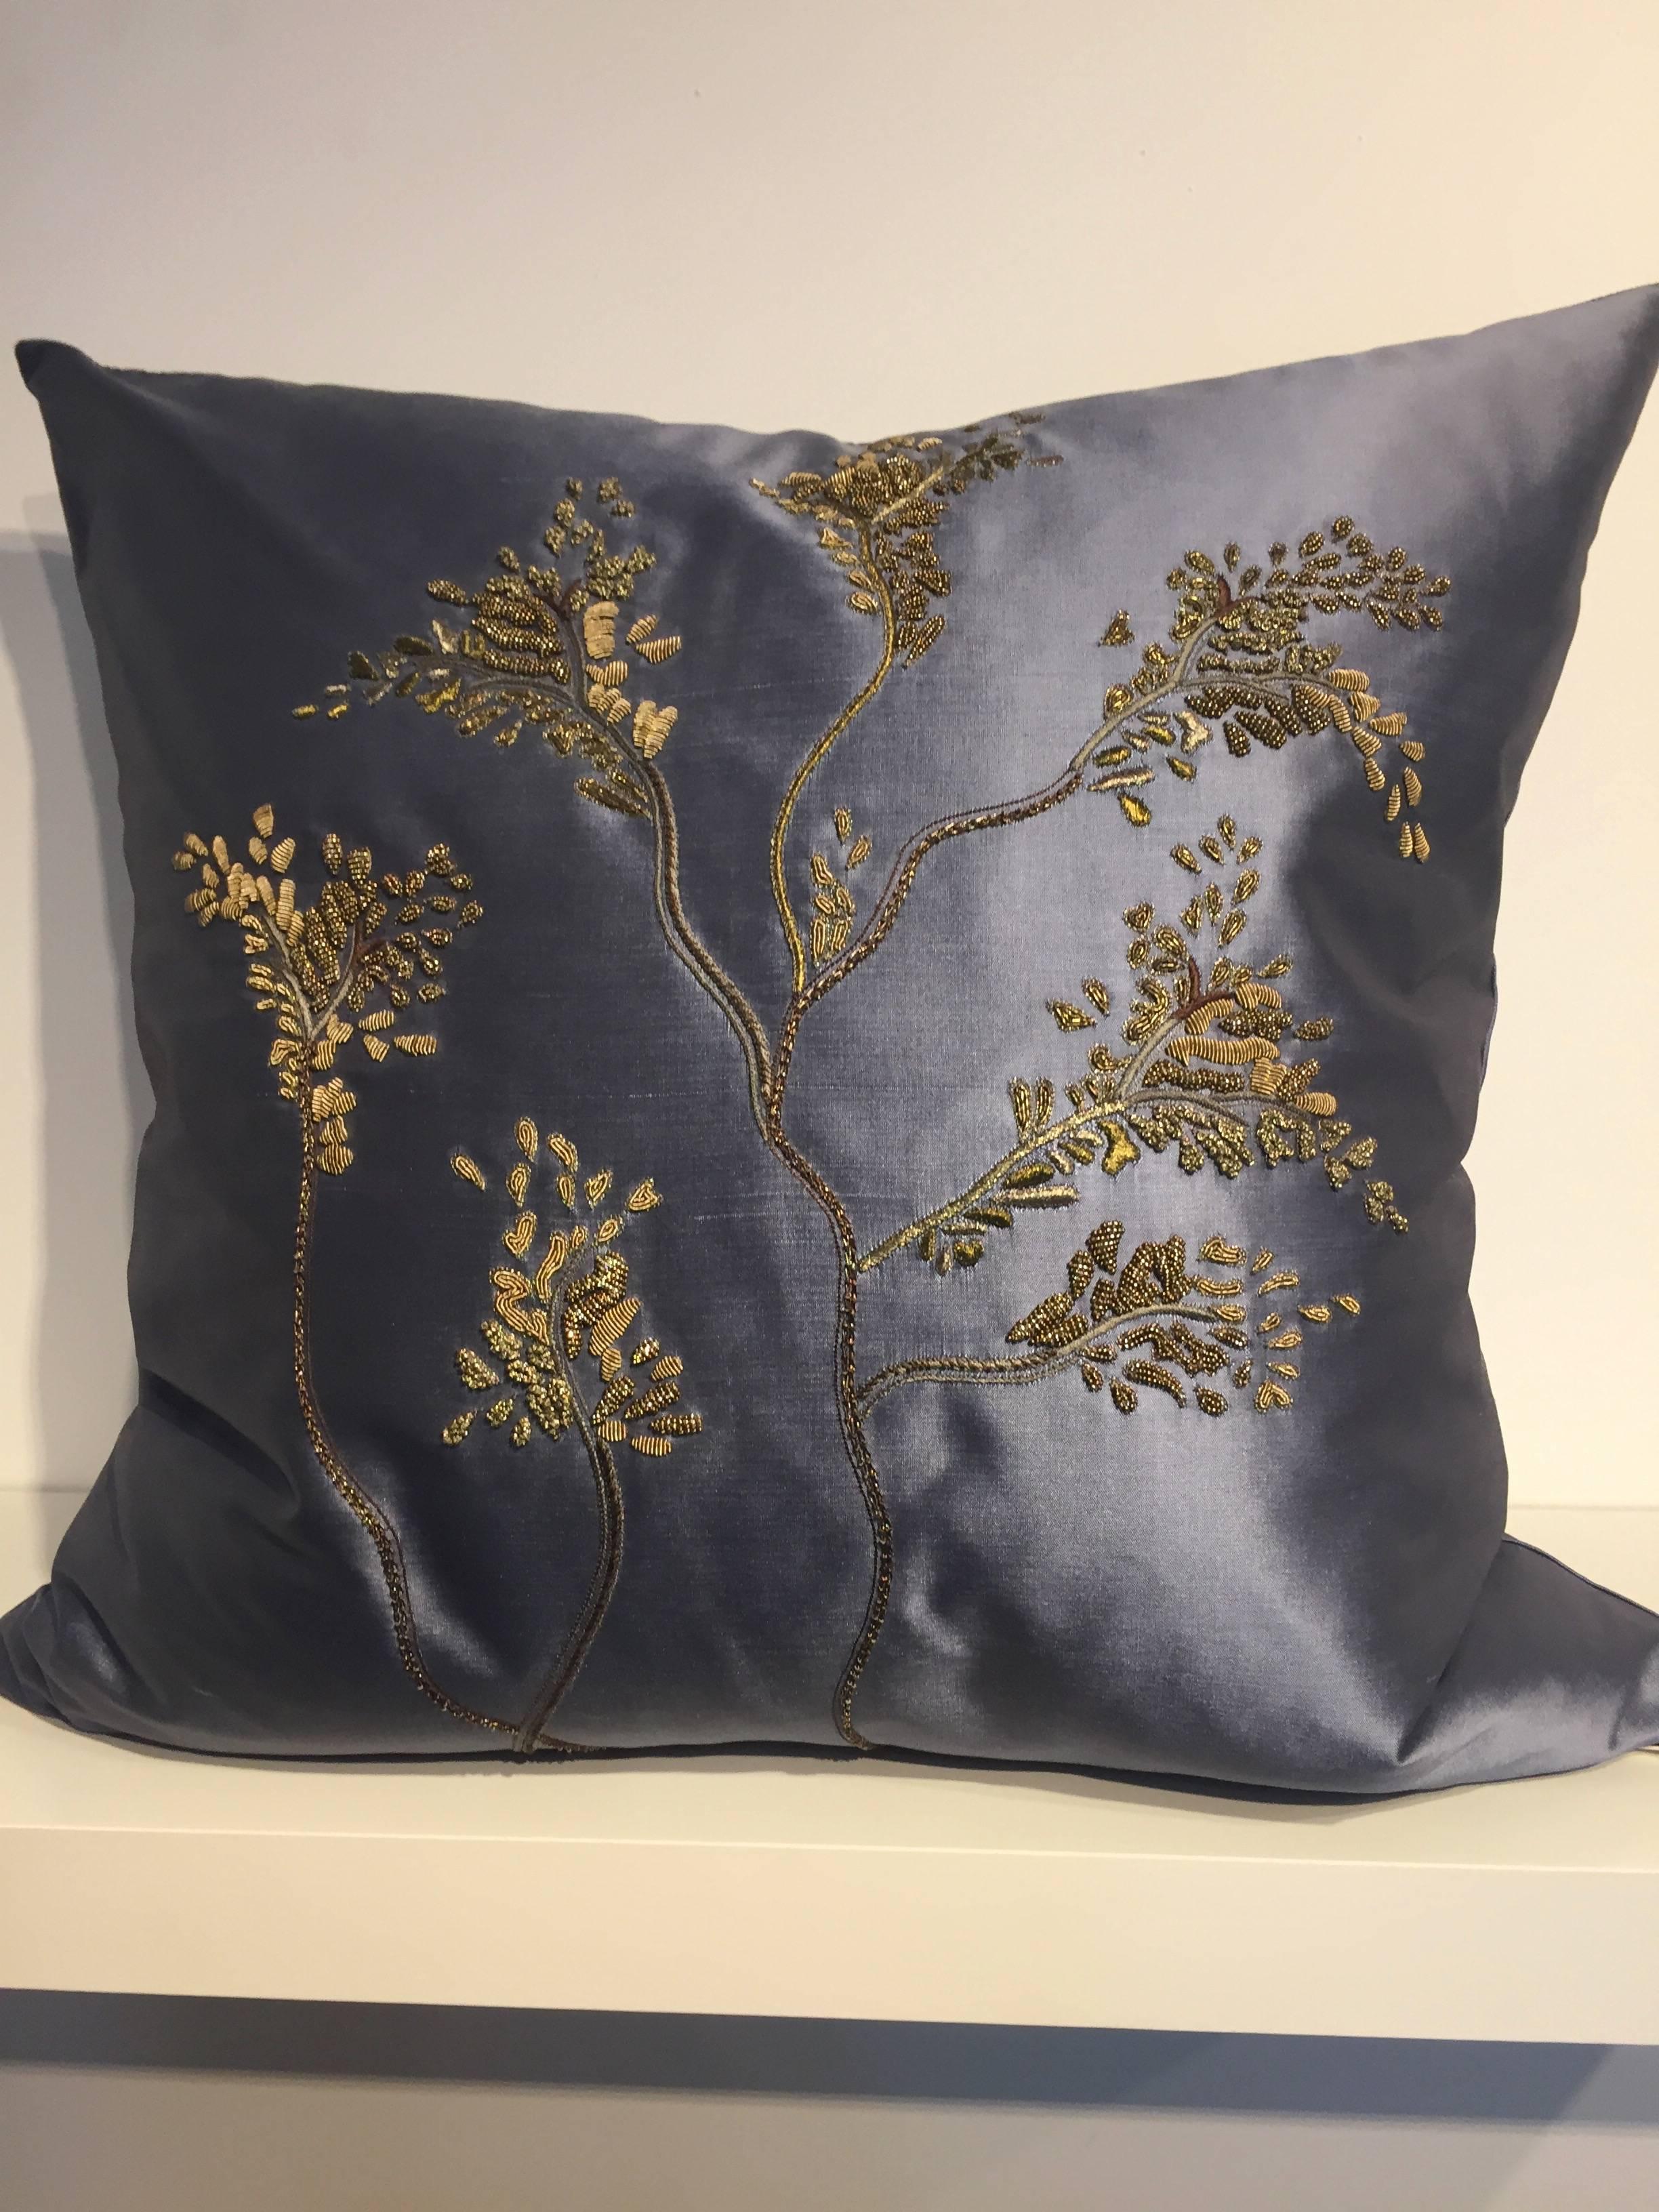 One pair of decorative cushions with hand embroidery, in the style of Emperor's garden, chinoiserie style, handwoven silk taffeta chase Erwin diva color dusk, embellished with hand embroidery in metal thread and beading in antique gold color, size